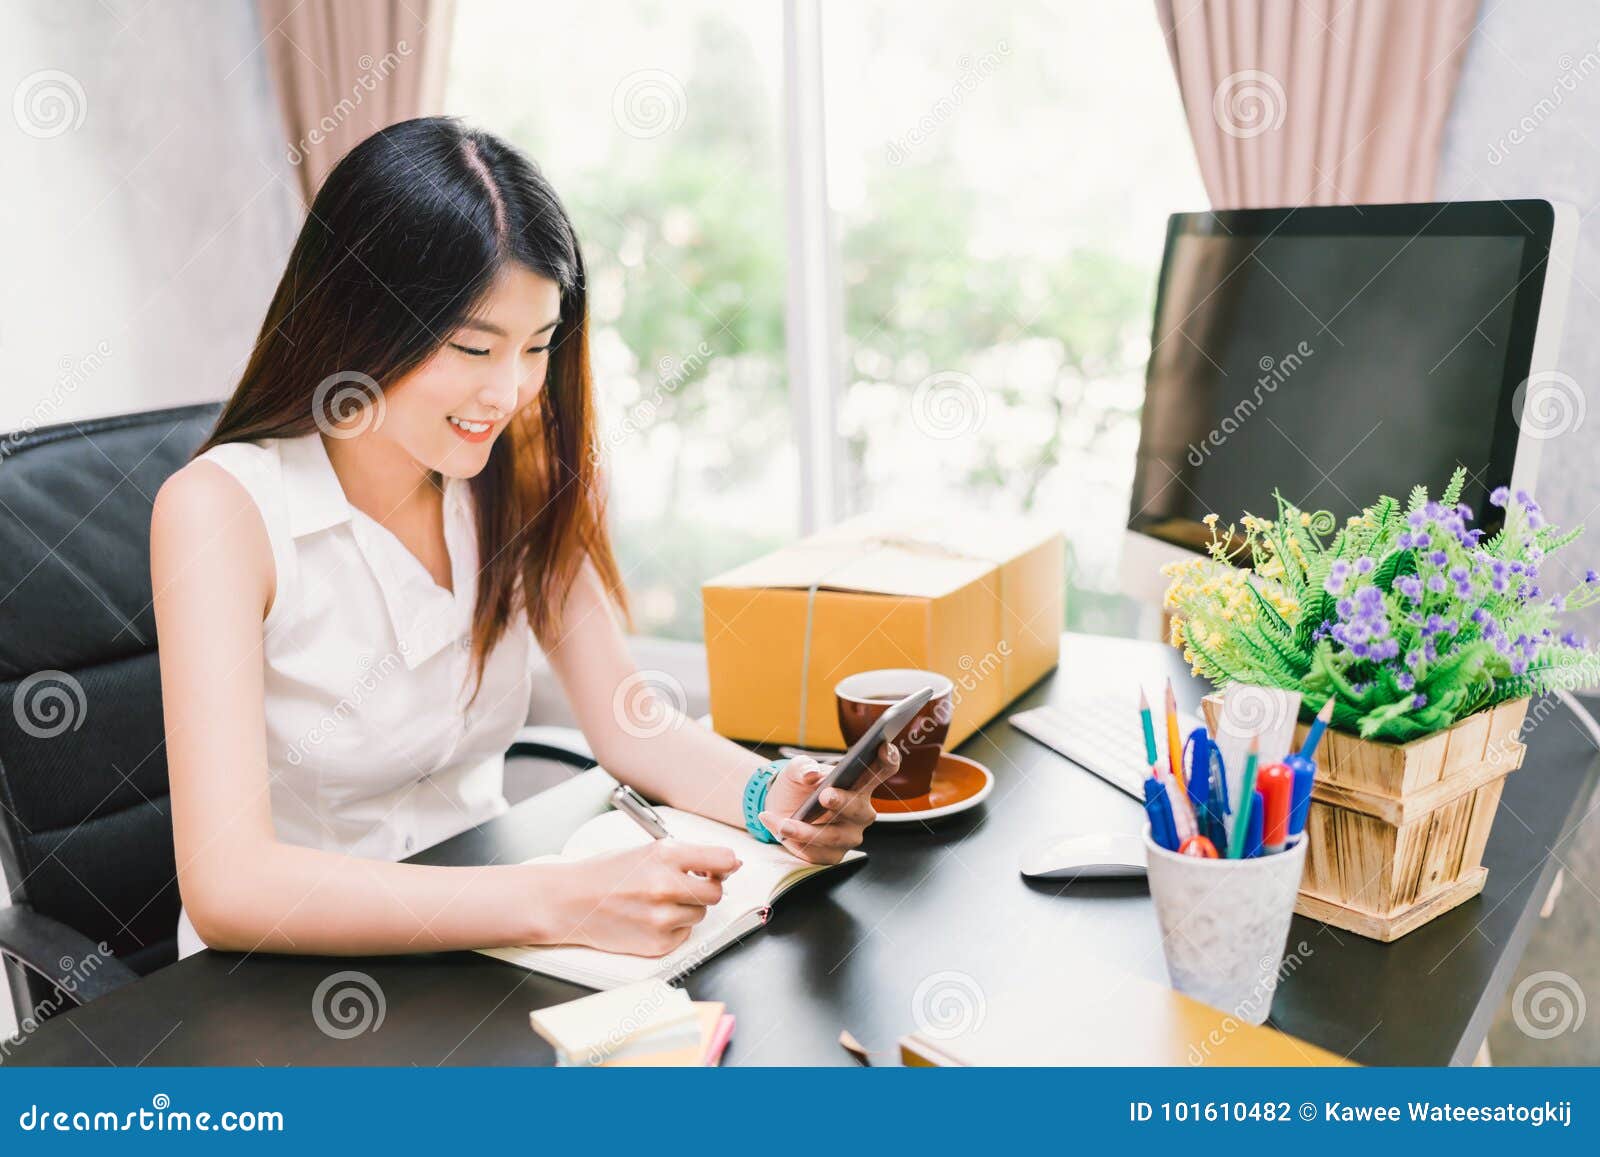 asian small business owner work at home office, using mobile phone call, writing confirm purchase order on notebook